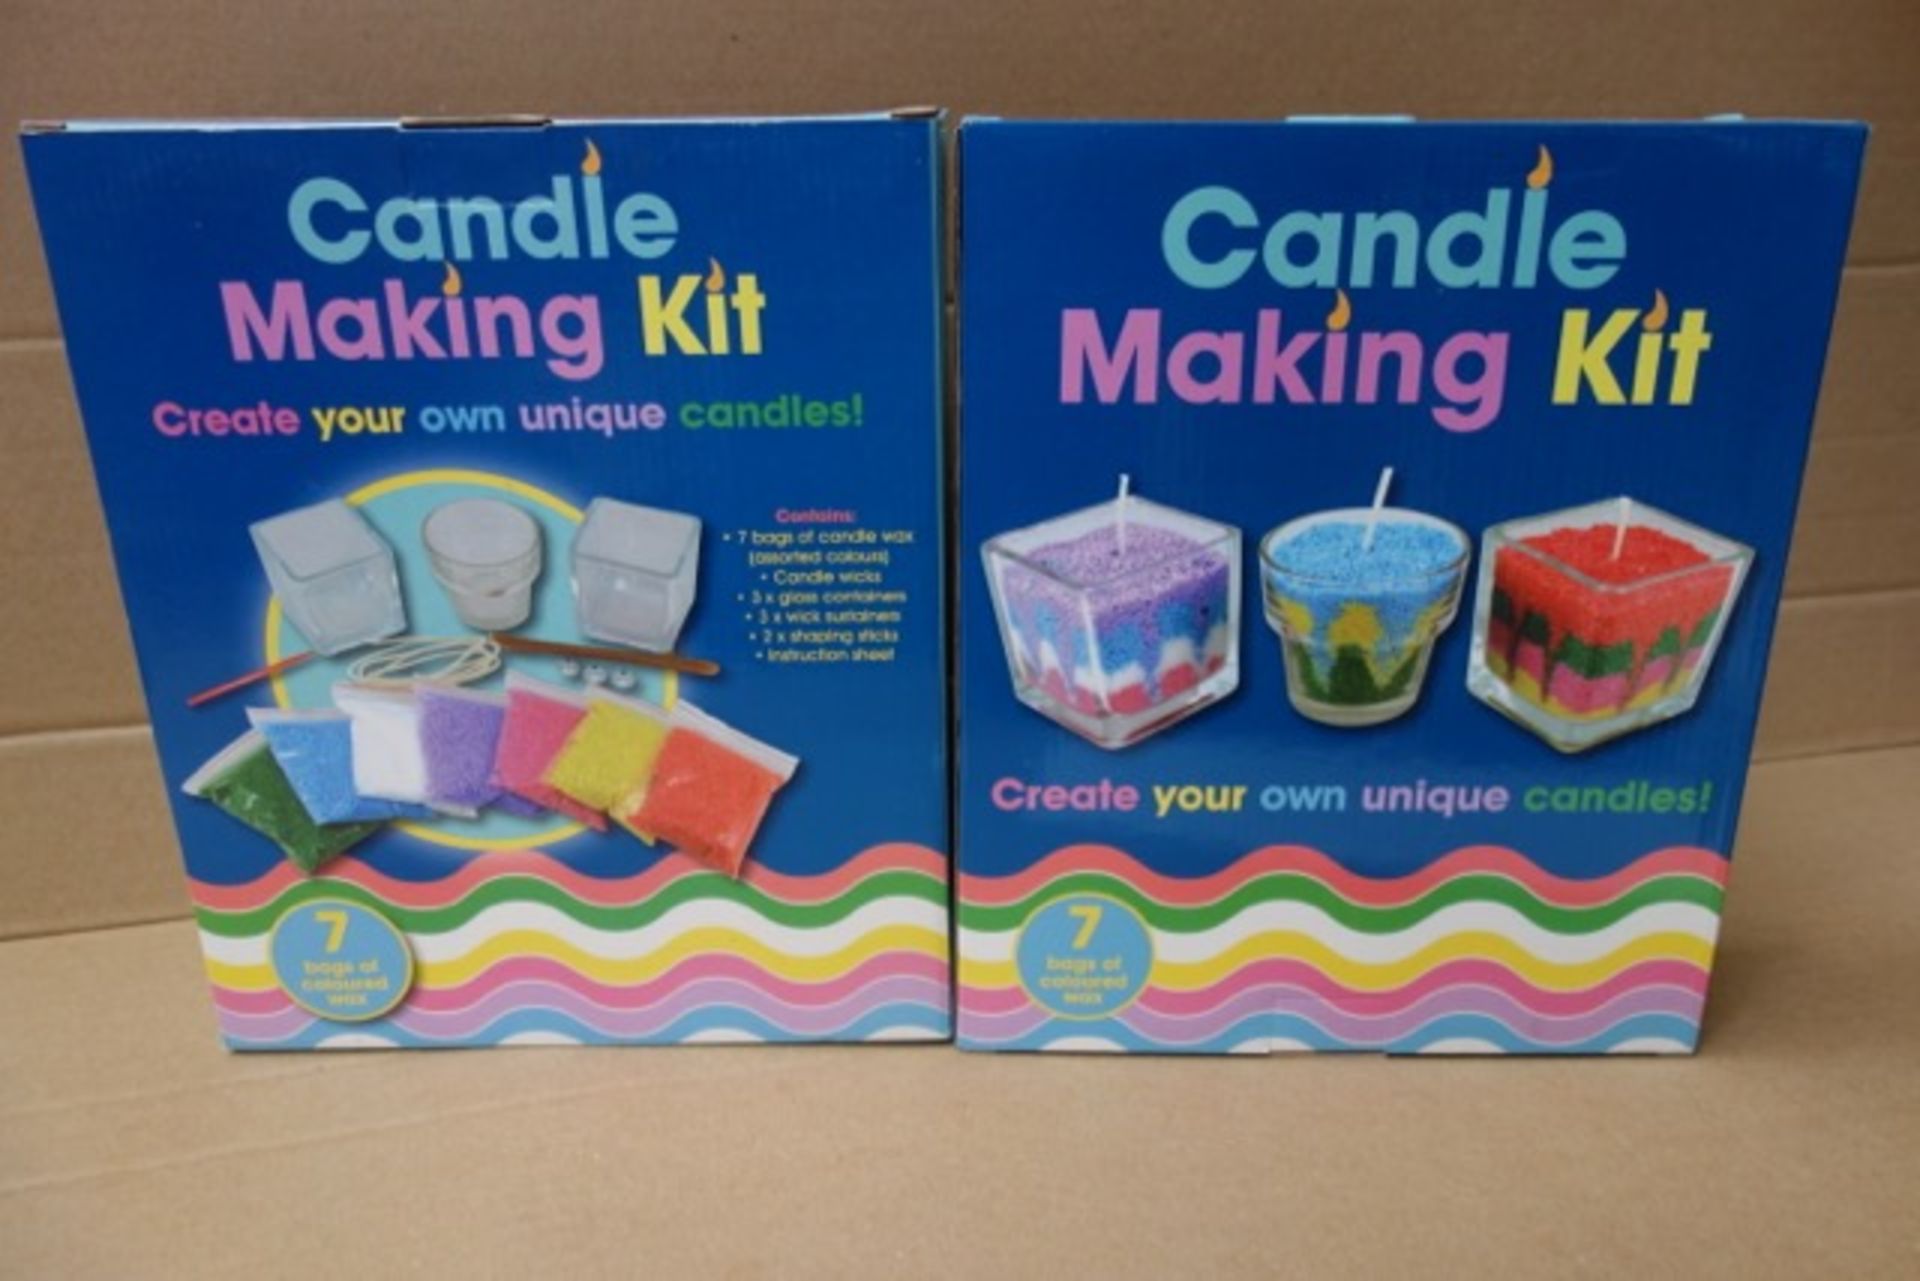 24 x Large Candle Making Kit. Create your own unique candles. Each set contains: 7 bags of candle